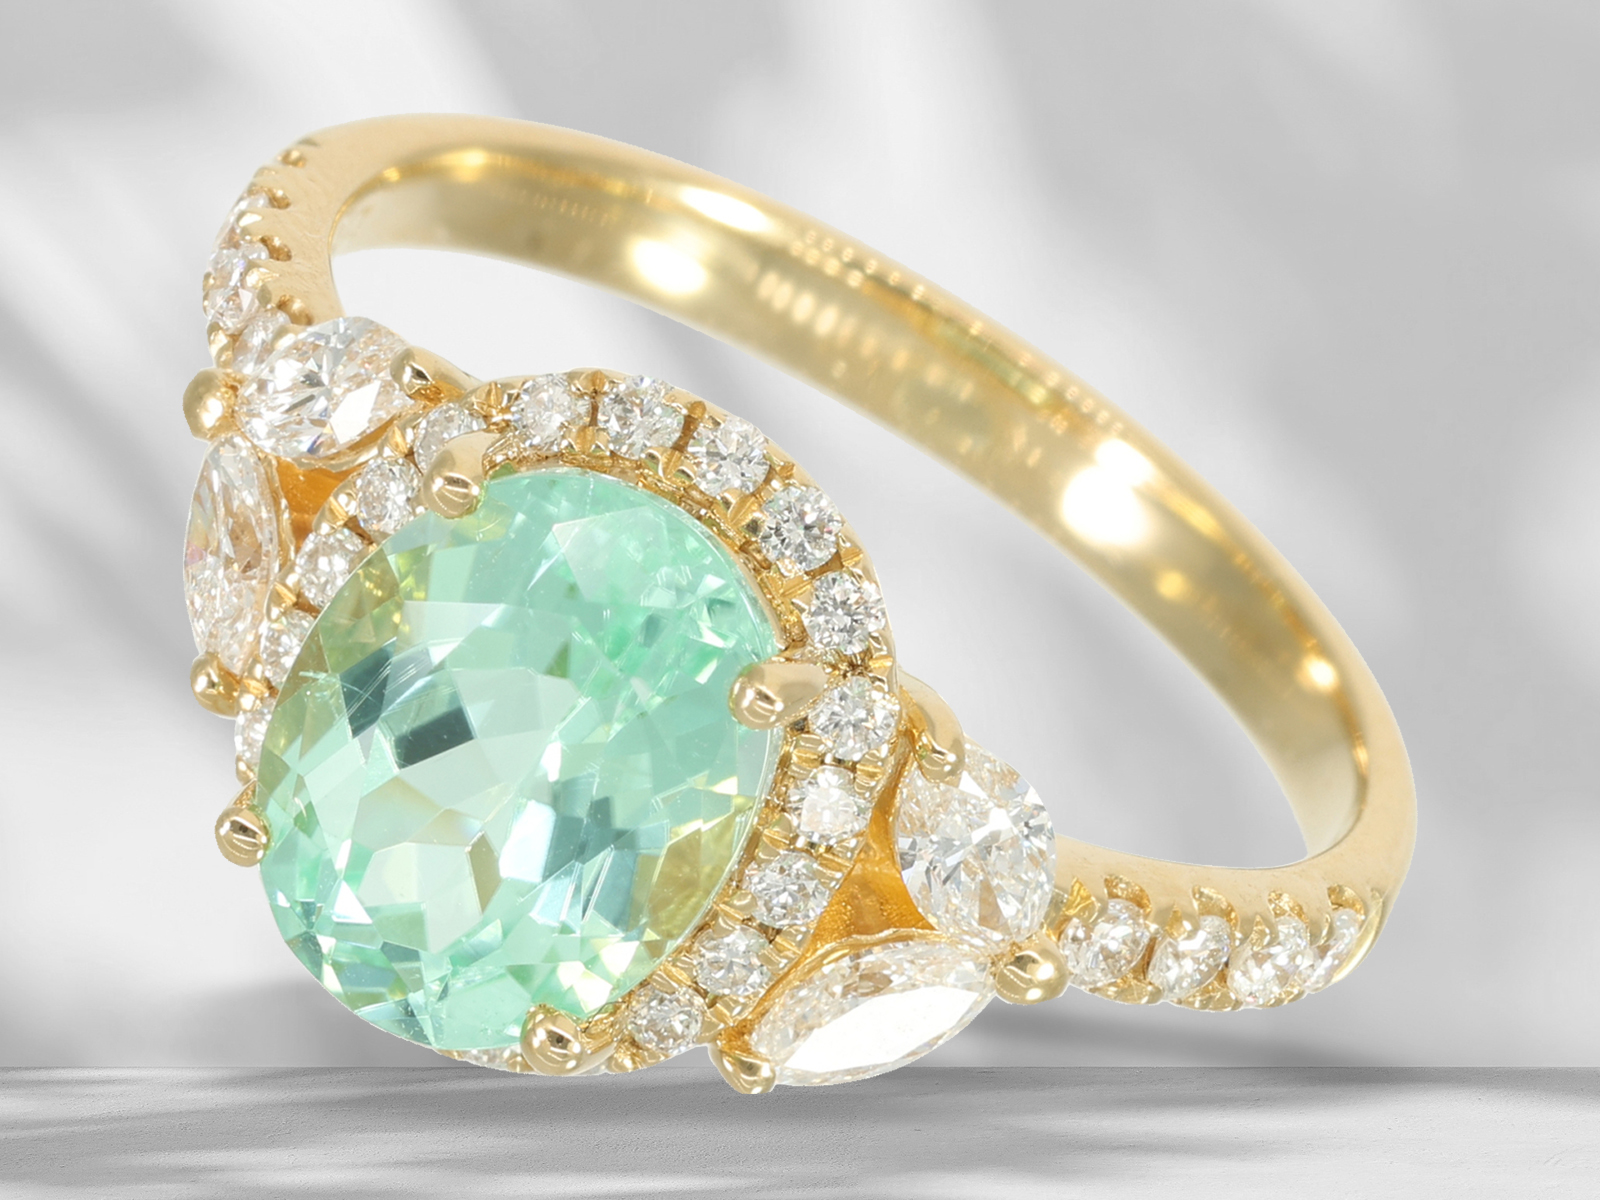 Ring: goldsmith ring with extremely rare Paraiba tourmaline and brilliant-cut diamonds, like new - Image 3 of 6